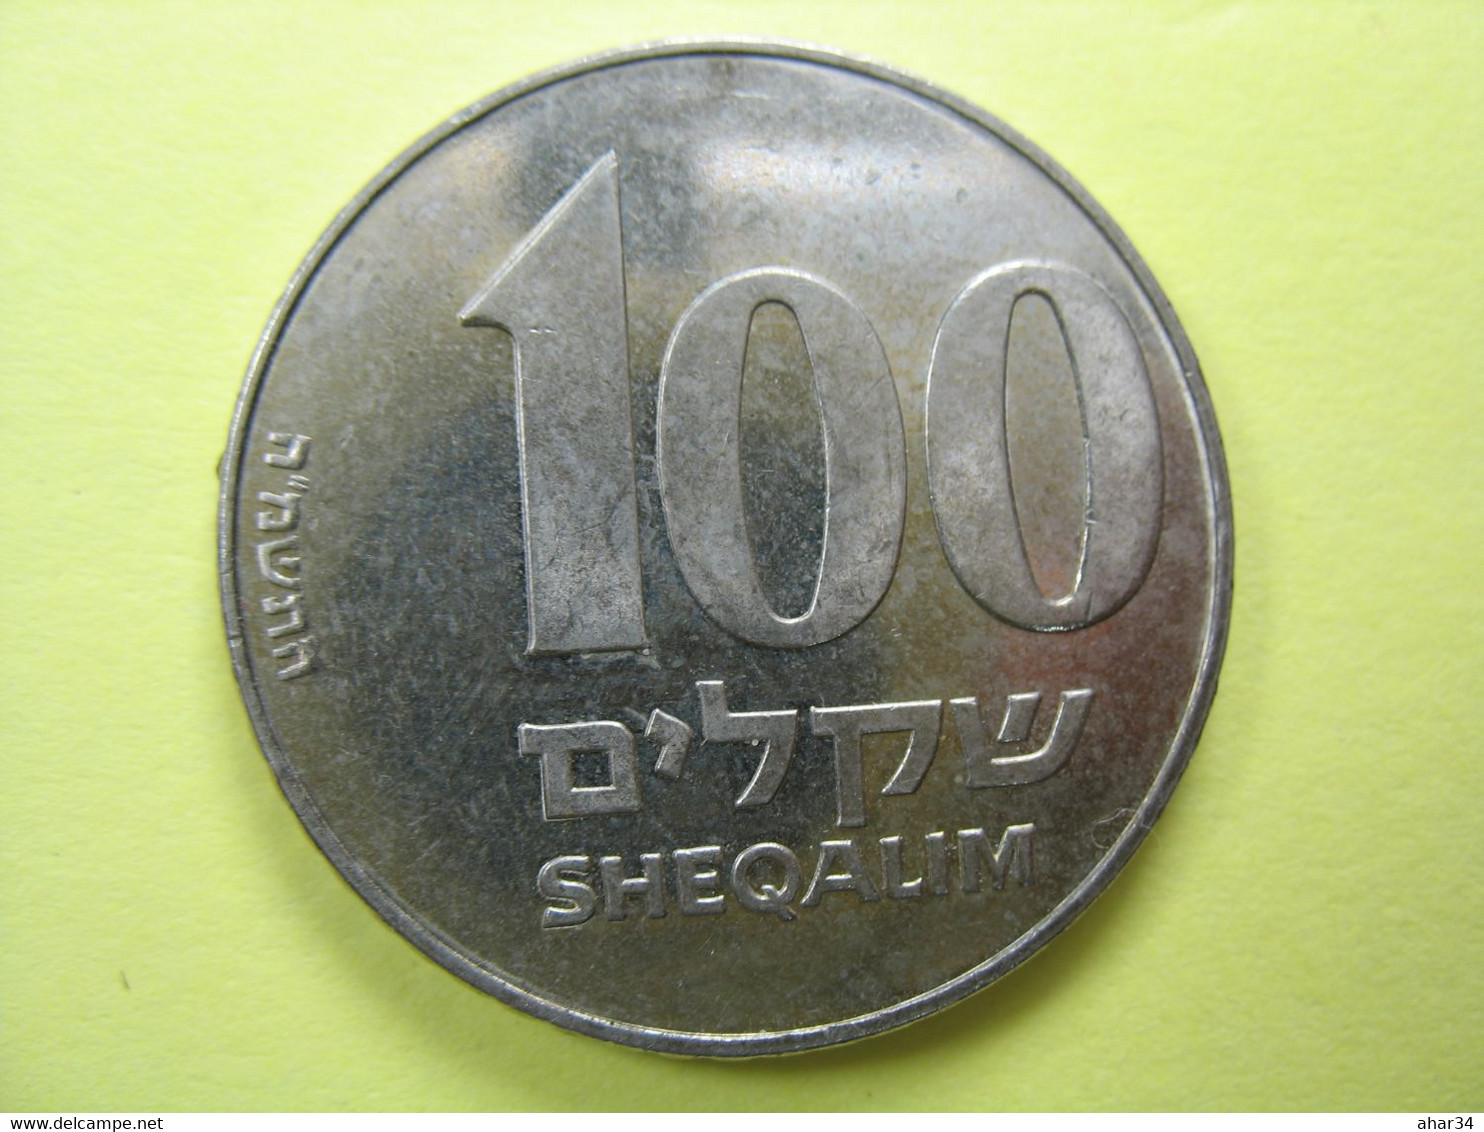 TEMPLATE LISTING ISRAEL  LOT OF  10 COINS 100 SHEQALIM 1985 JABOTINSKY  UNC COIN. - Autres – Asie